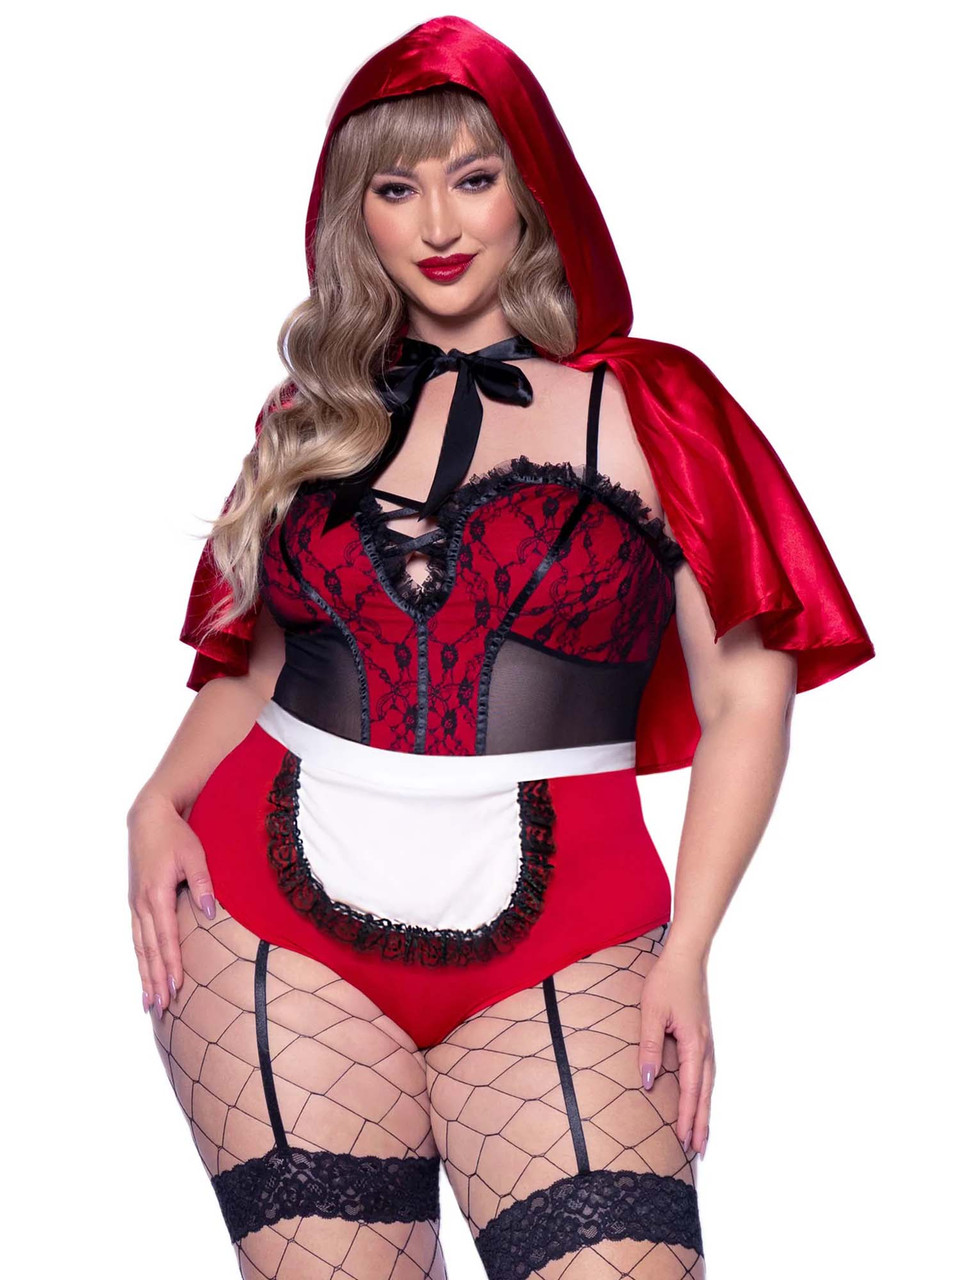 Naughty Miss Red Riding Hood Costume